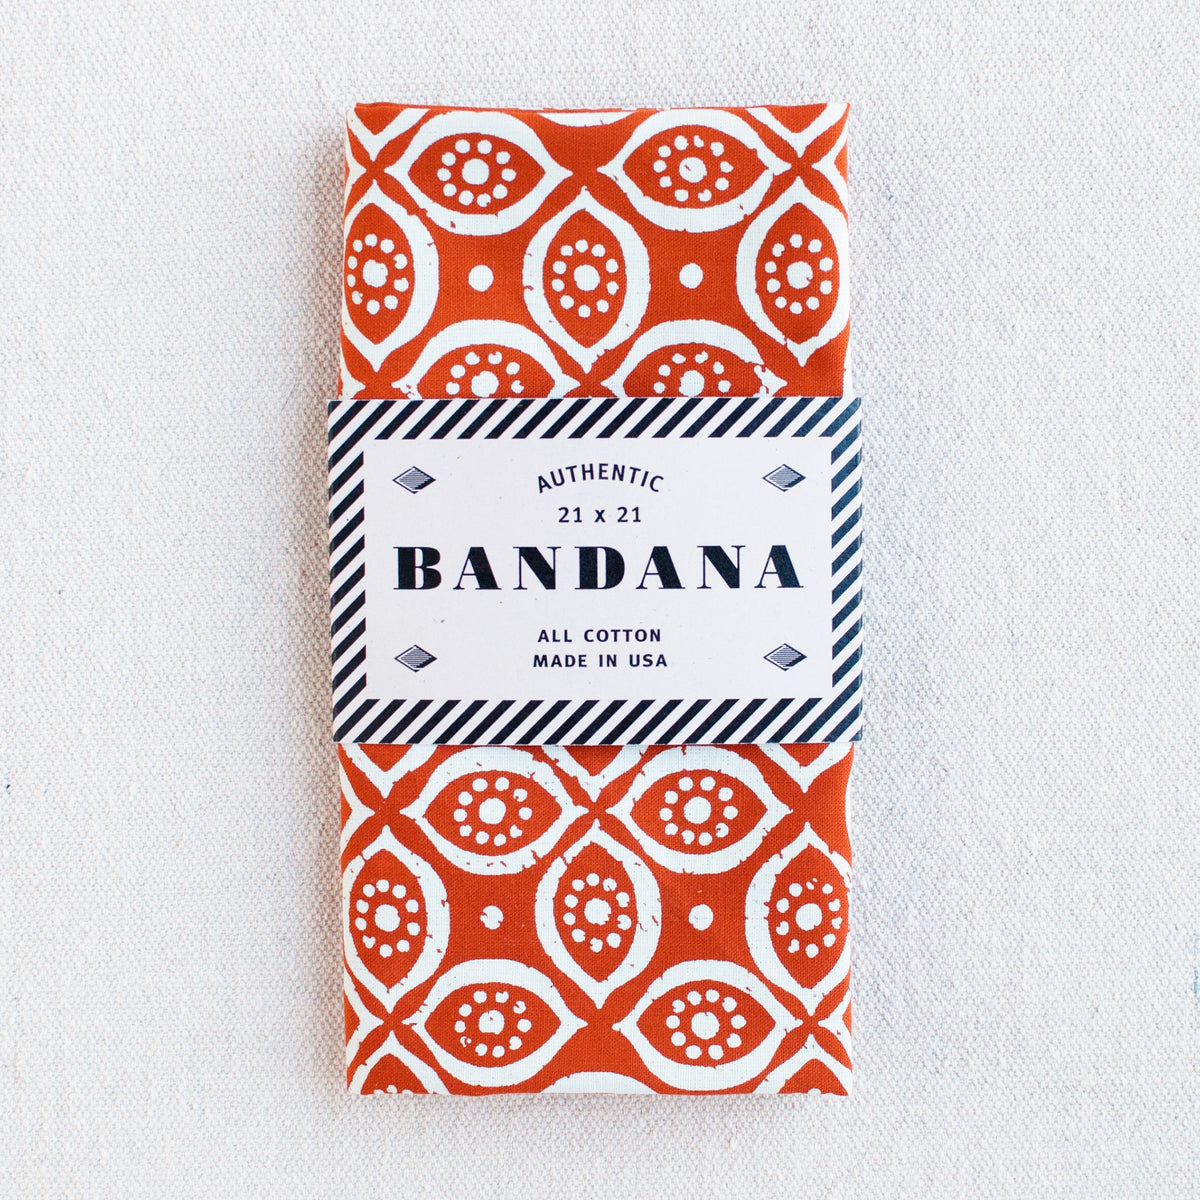 Burnt orange bandana with white screen print. Vintage stylized eye print, folded and packaged in eco-friendly recycled paper band.